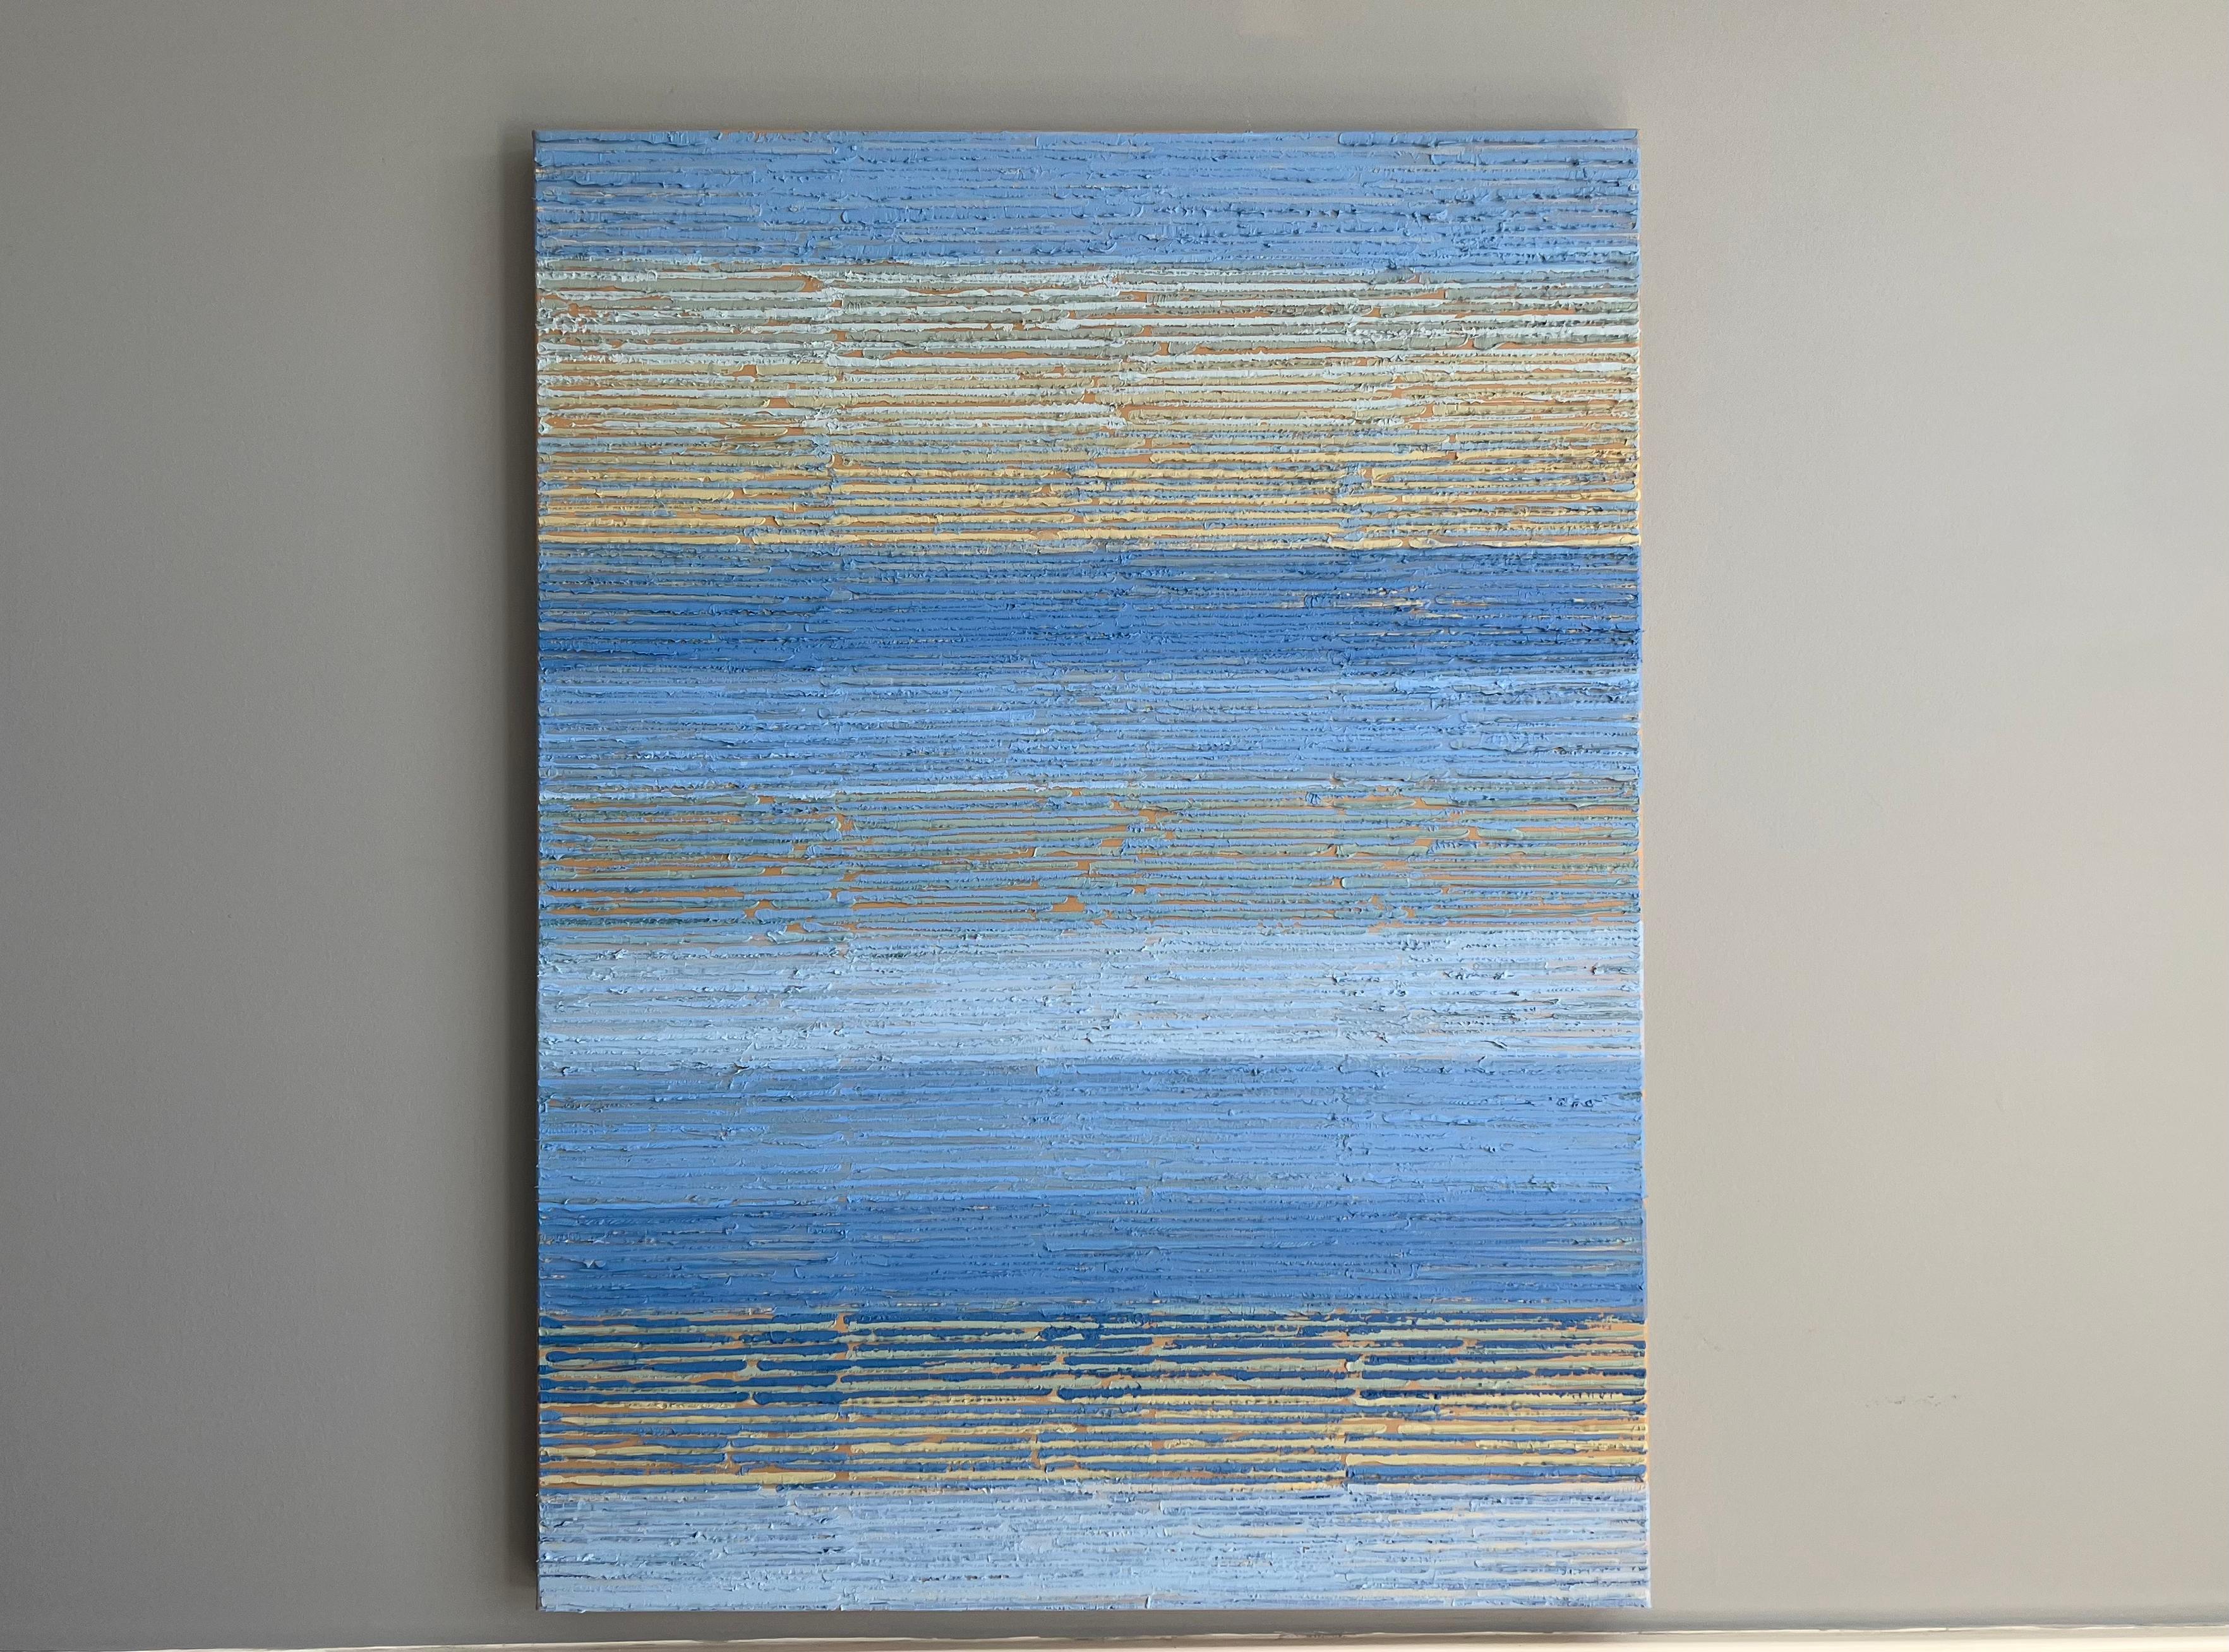 <p>Artist Comments<br>Artist Janet Hamilton depicts an intricately textured abstract painting with rich gradations of color. She paints indigo and beige stripes,  creating bands of soothing hues. Structured frequencies of blue hues delicately flow